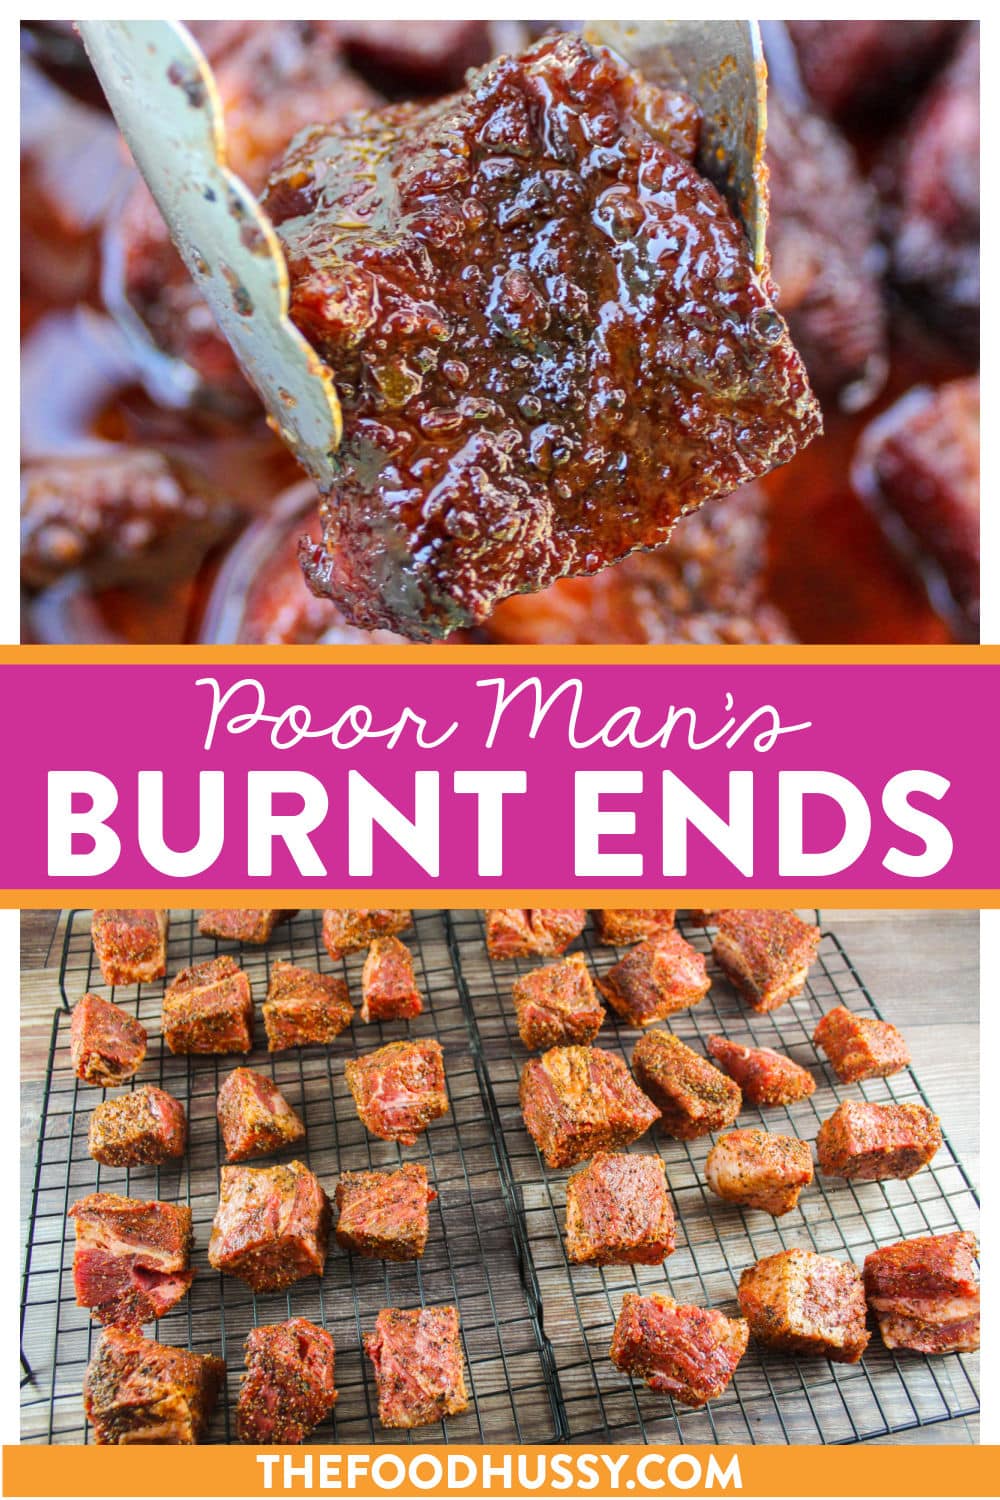 Poor Mans Burnt Ends are a quick way to enjoy deliciously smoked juicy bites of beef - without an overnight smoke! A chuck roast turns into smoky tender pieces that melt in your mouth! via @foodhussy